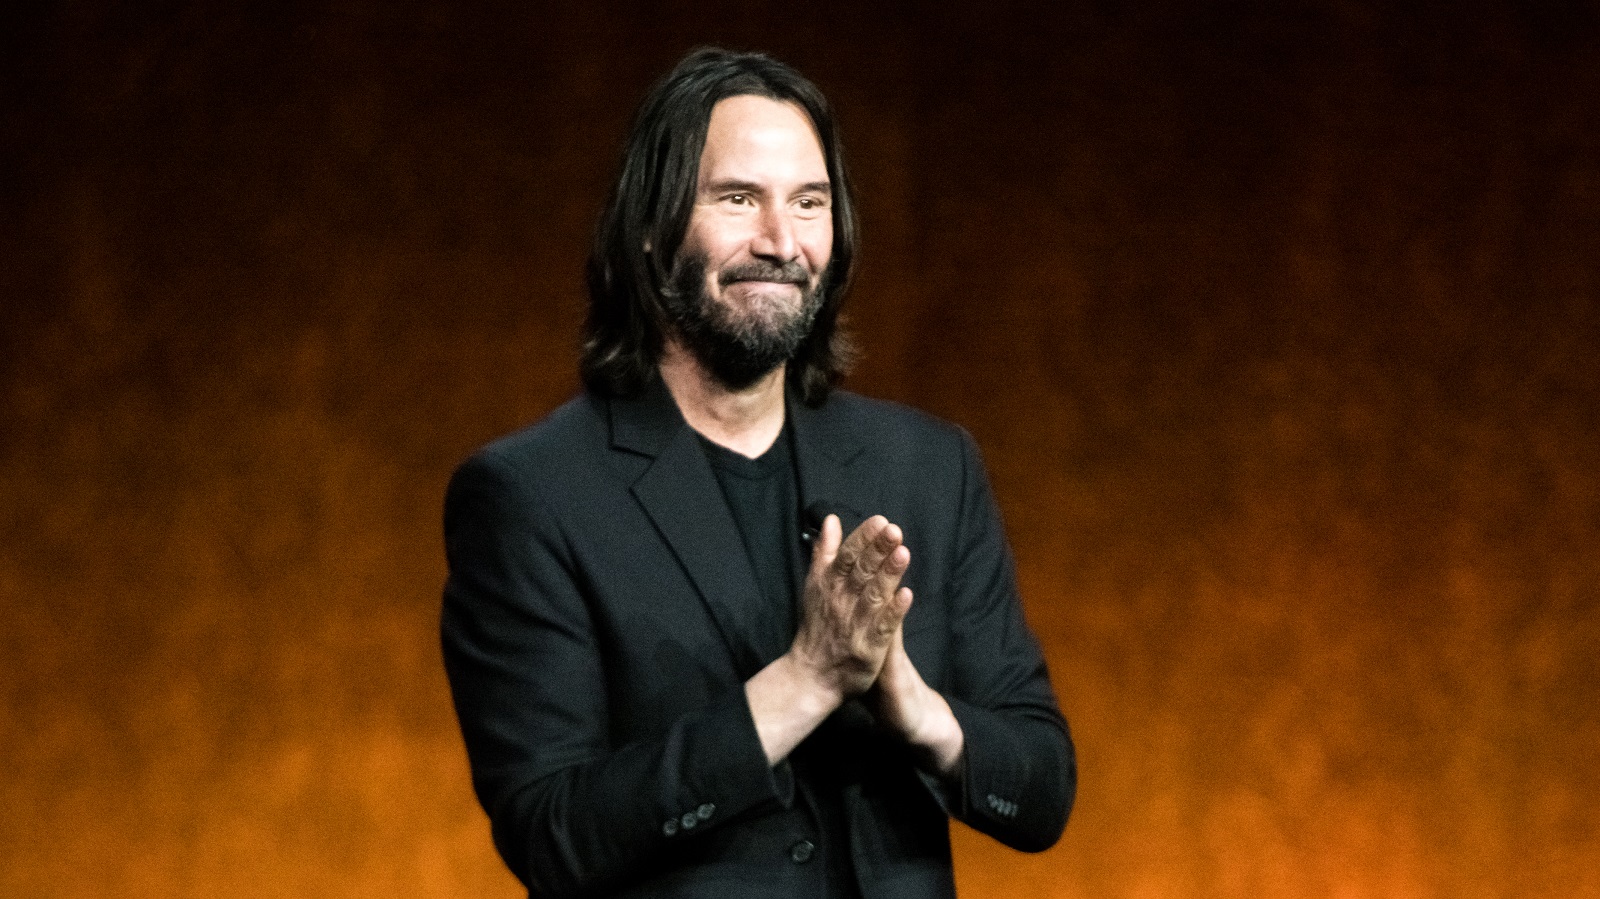 Actor Keanu Reeves presents the movie "John Wick: Chapter 4" during Lionsgate exclusive presentation at Caesars Palace during CinemaCon 2022.